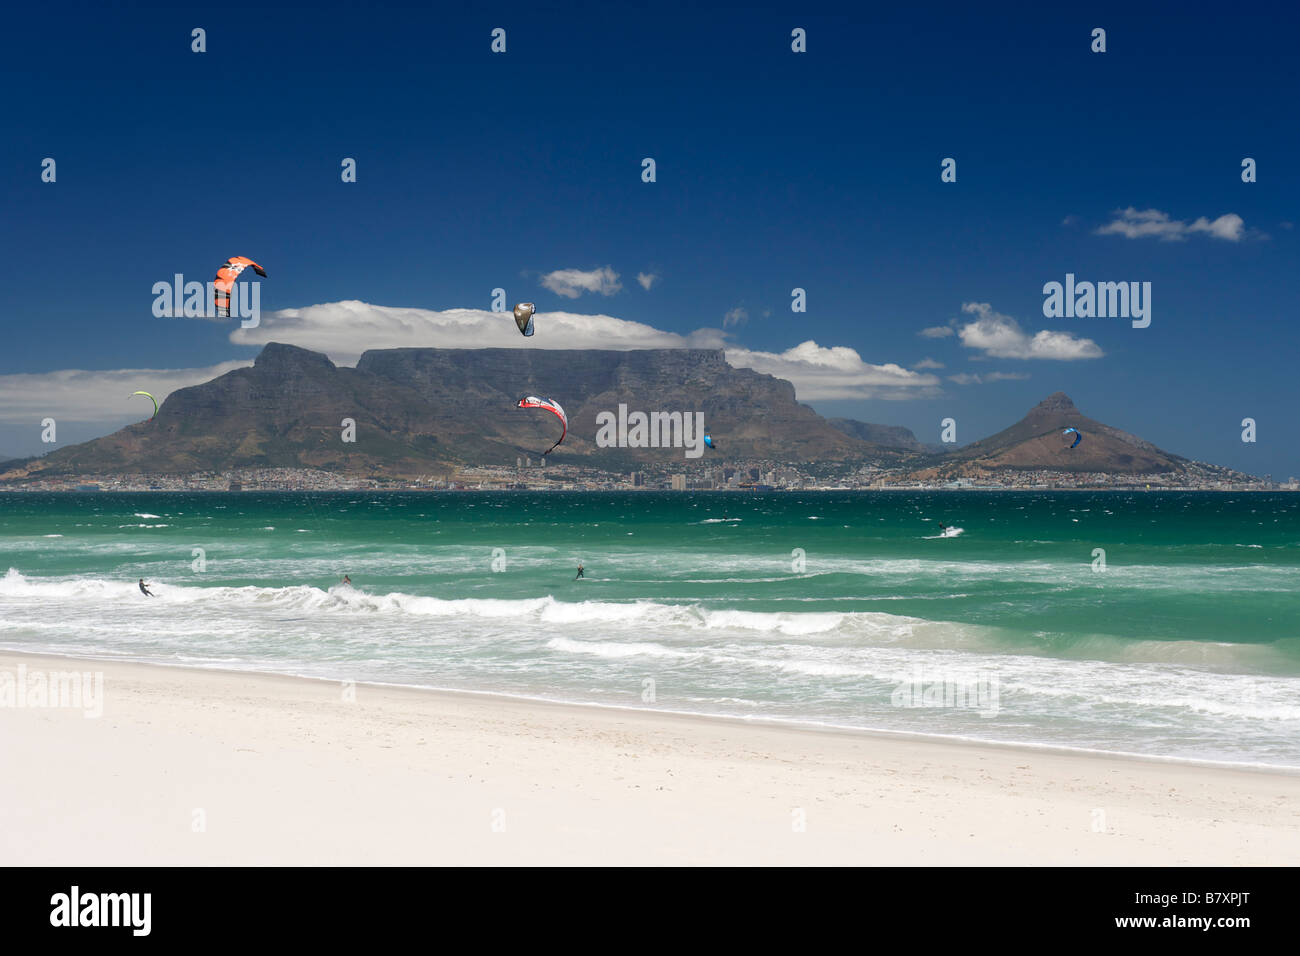 Kite-surfers at Blouberg Beach with a view of Table Mountain and the city of Cape Town visible across Table Bay. Stock Photo